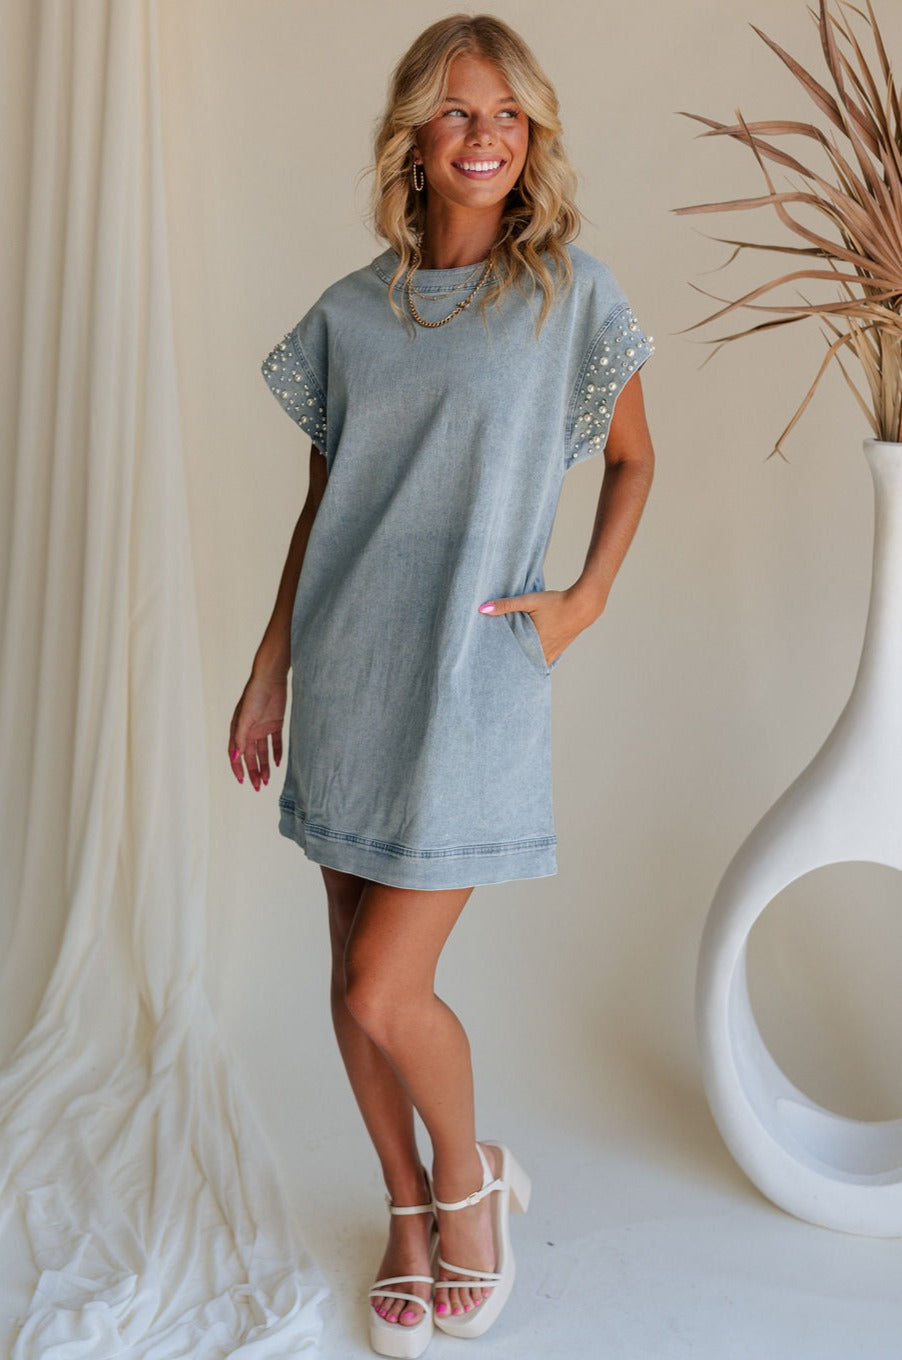 full body view of female model wearing the Raelyn Light Denim Pearl & Rhinestone Mini Dress which features Light Denim Wash Fabric, Side Pockets, Pearl and Rhinestone Details, Round Neckline, Short Sleeves and Back Zipper with Hook Closure